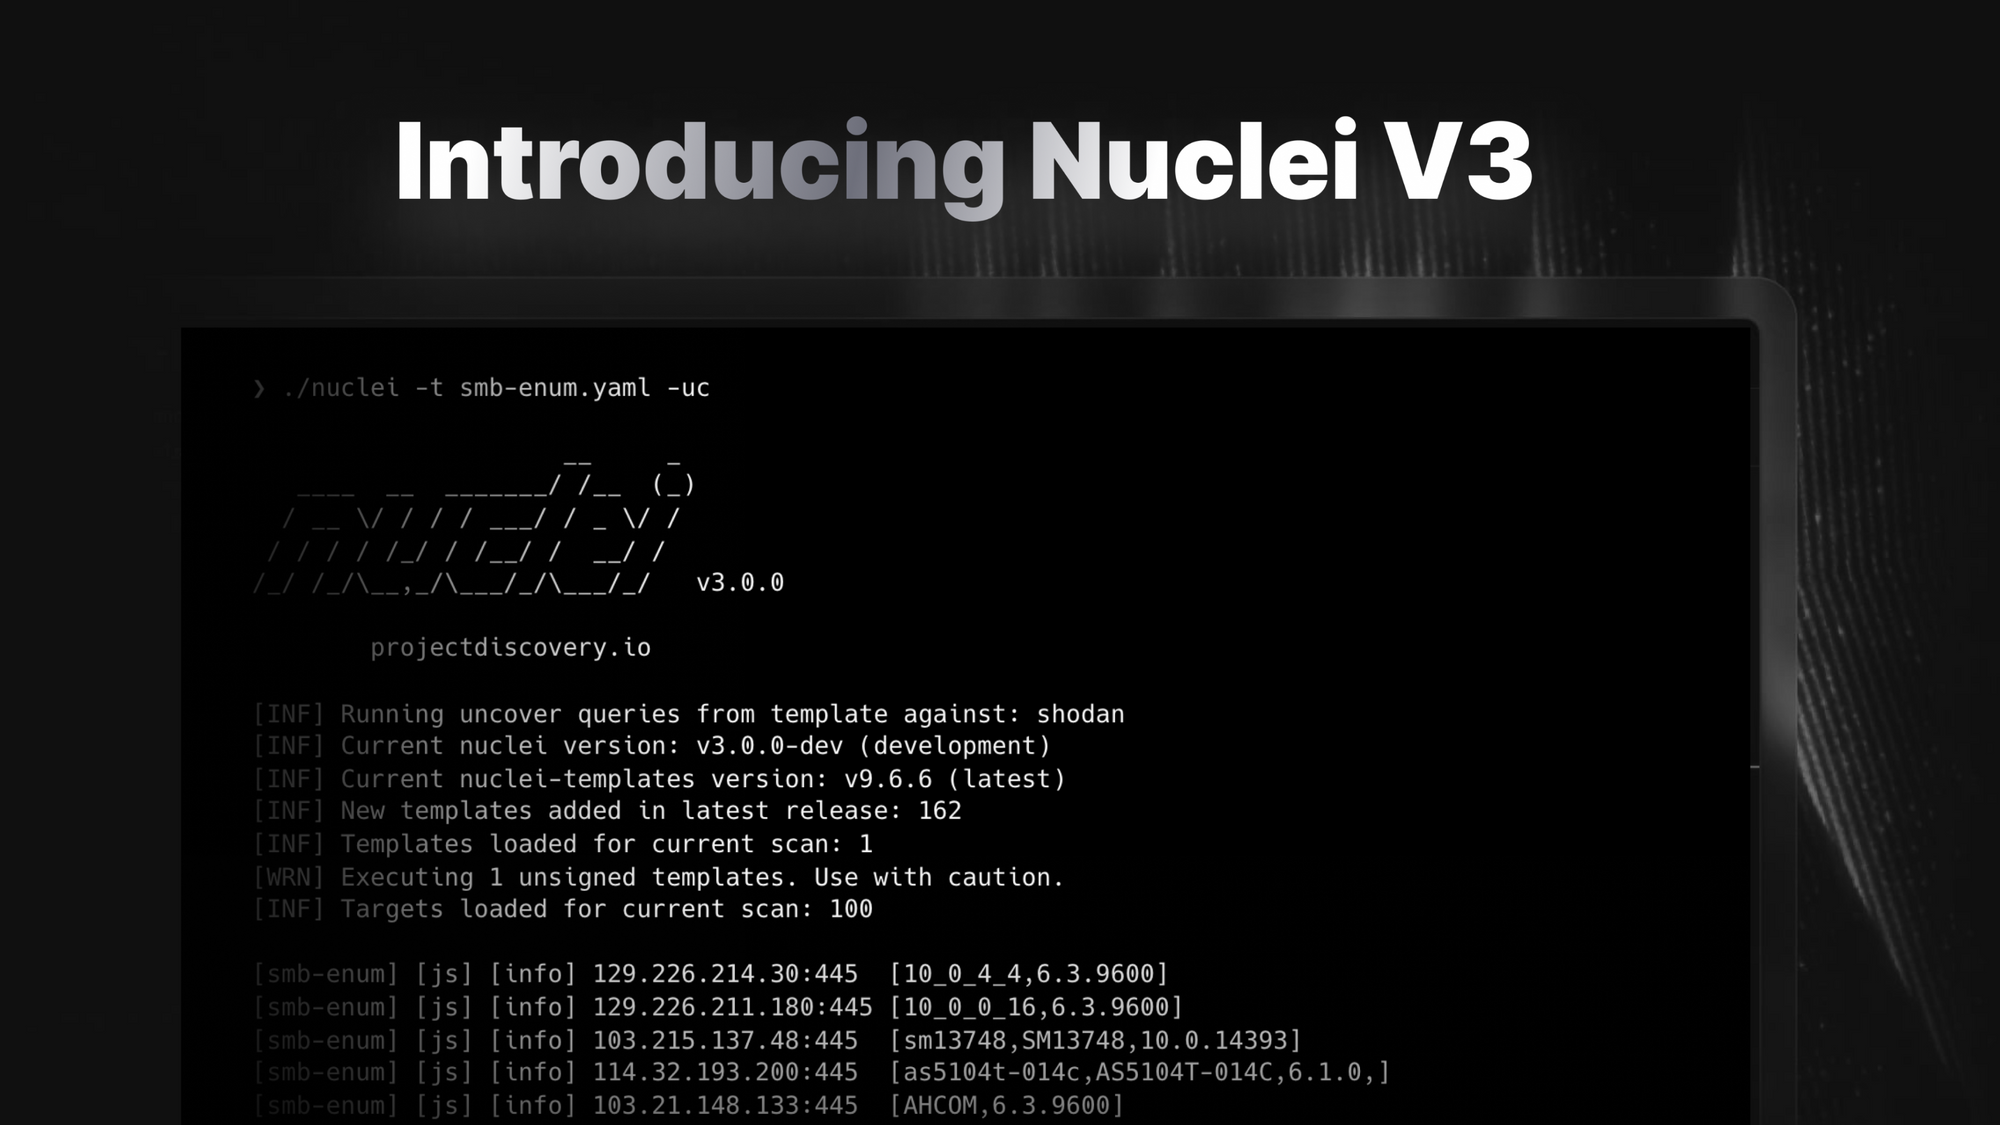 Introducing Nuclei v3